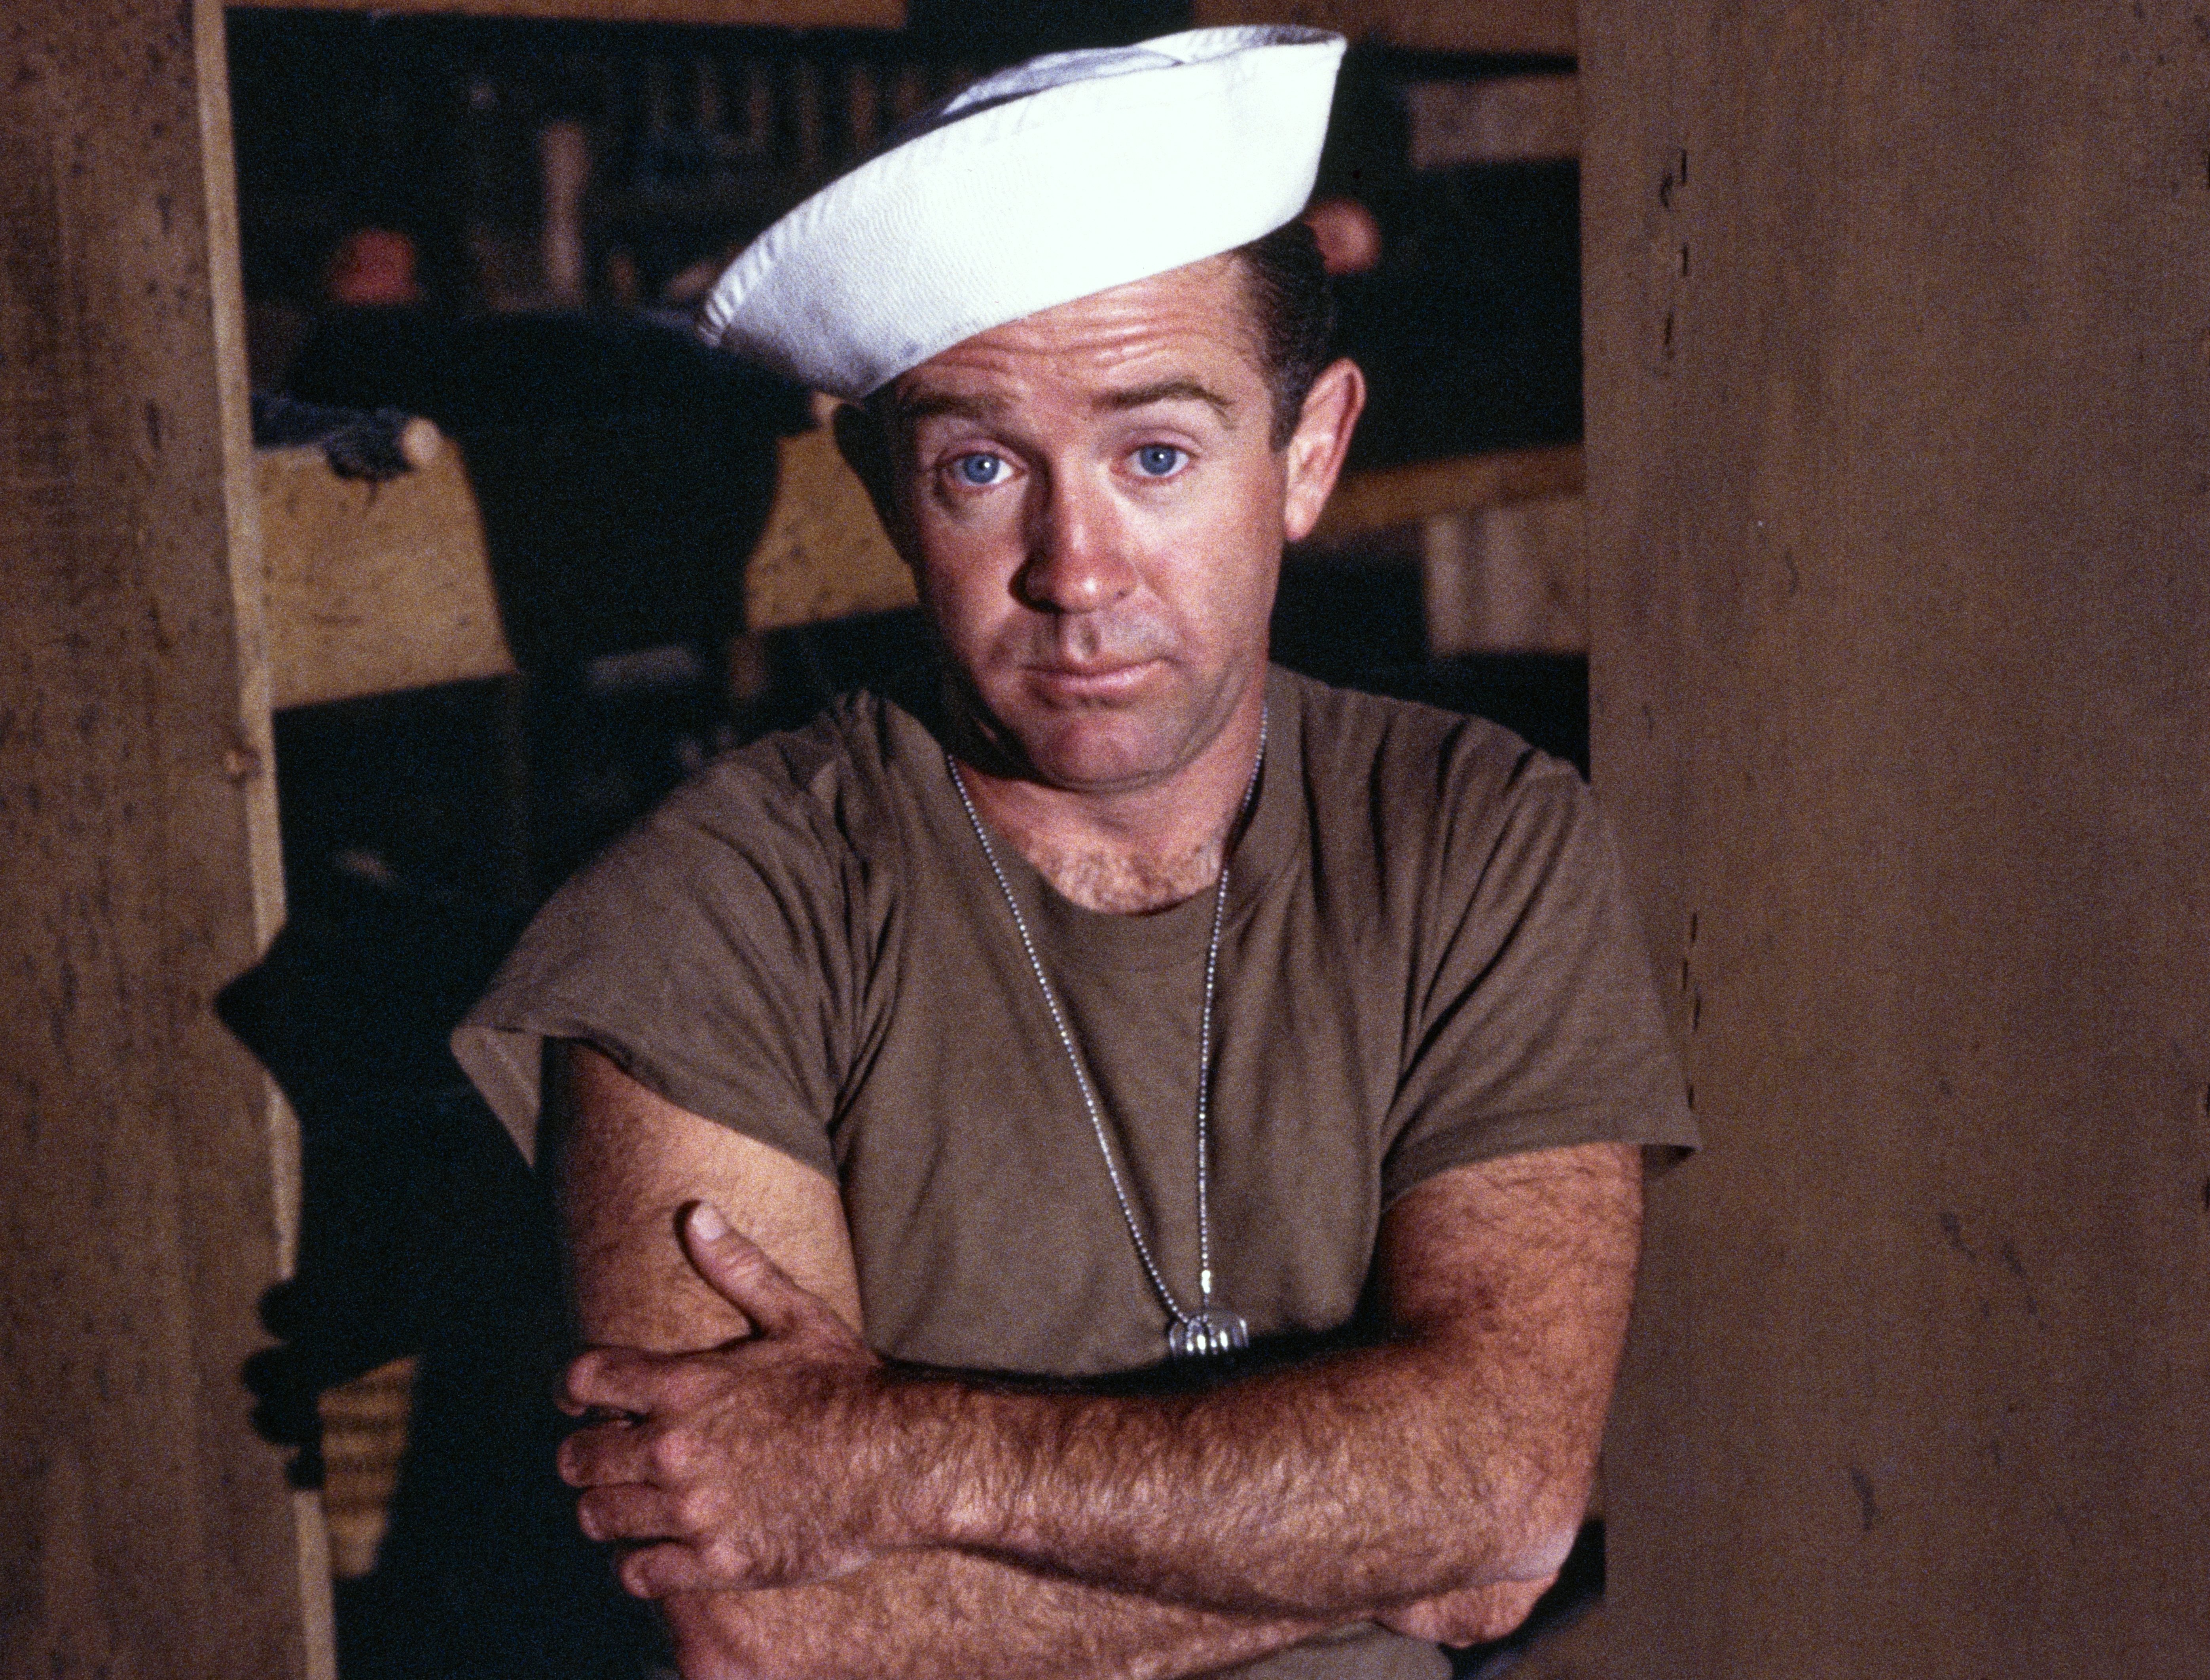 Leslie Jordan on the set of "The Road Raiders" in Los Angeles on April 25, 1989 | Source: Getty Images